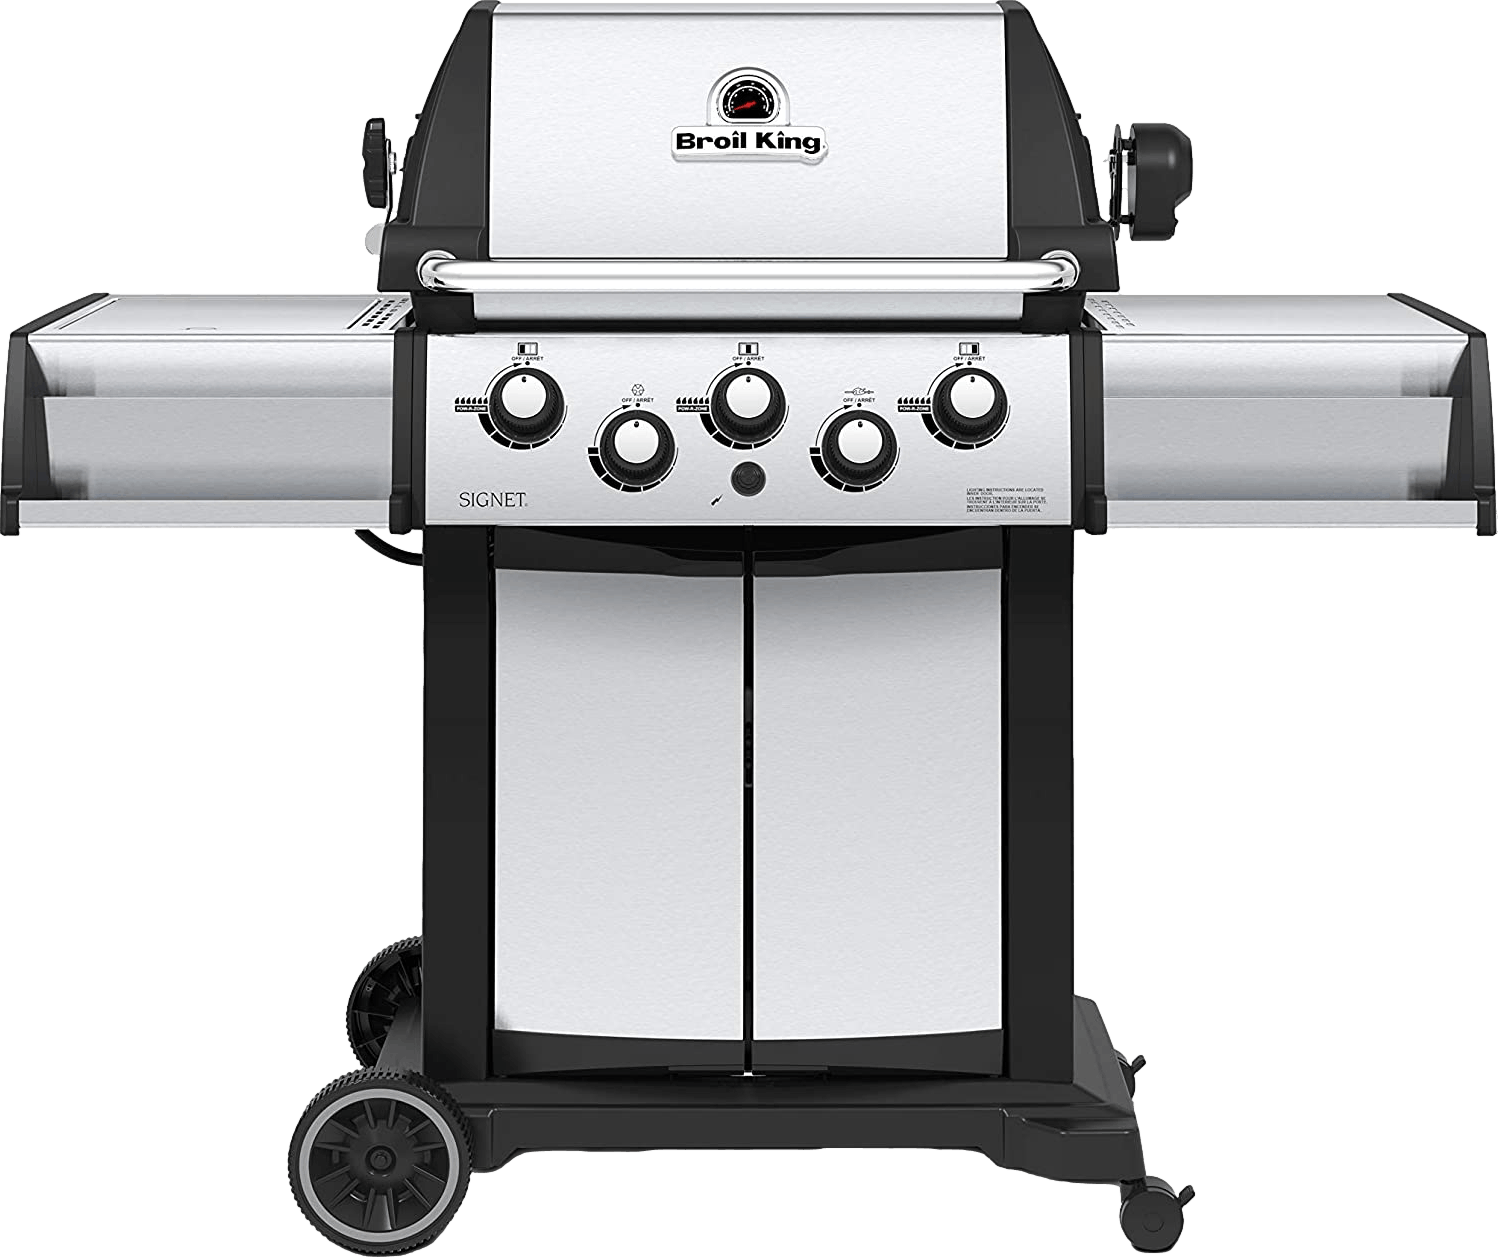 Broil King Signet 390 Gas Grill · Propane